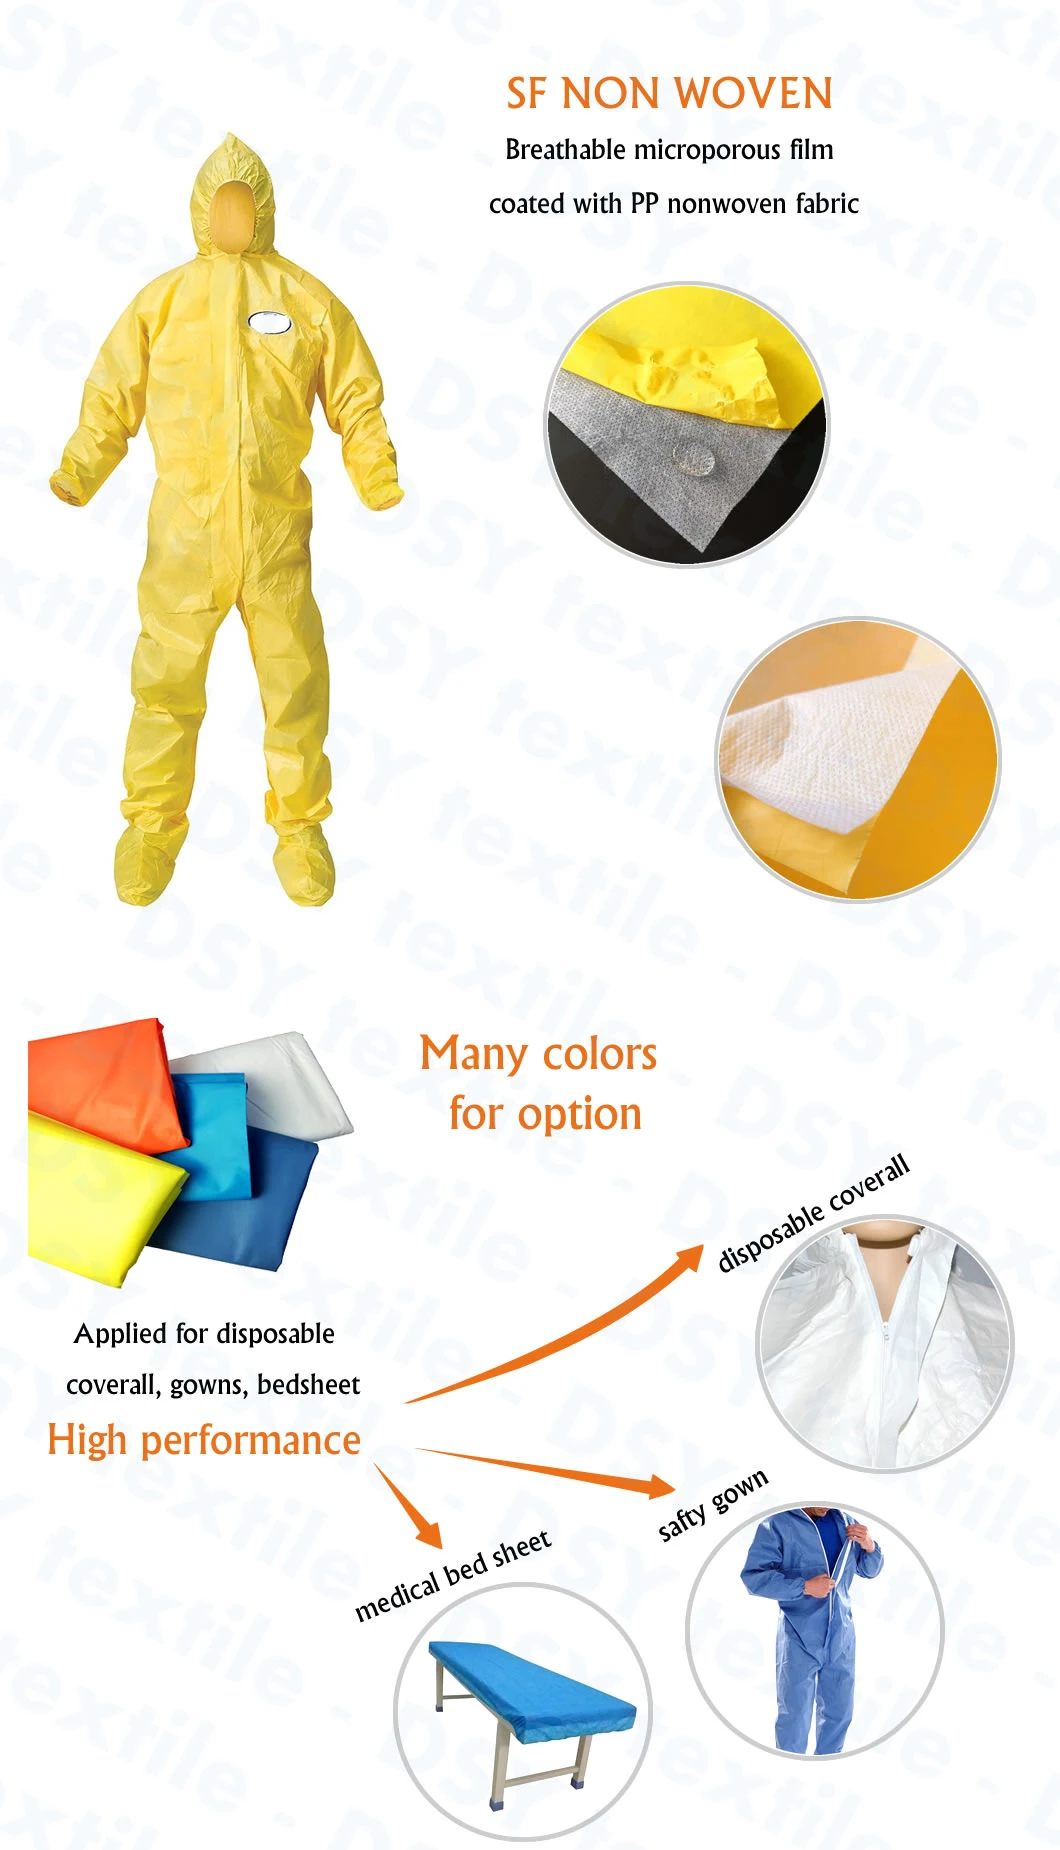 Breathable Film Laminated Nonwoven Fabric for Hospital Isolation Gown